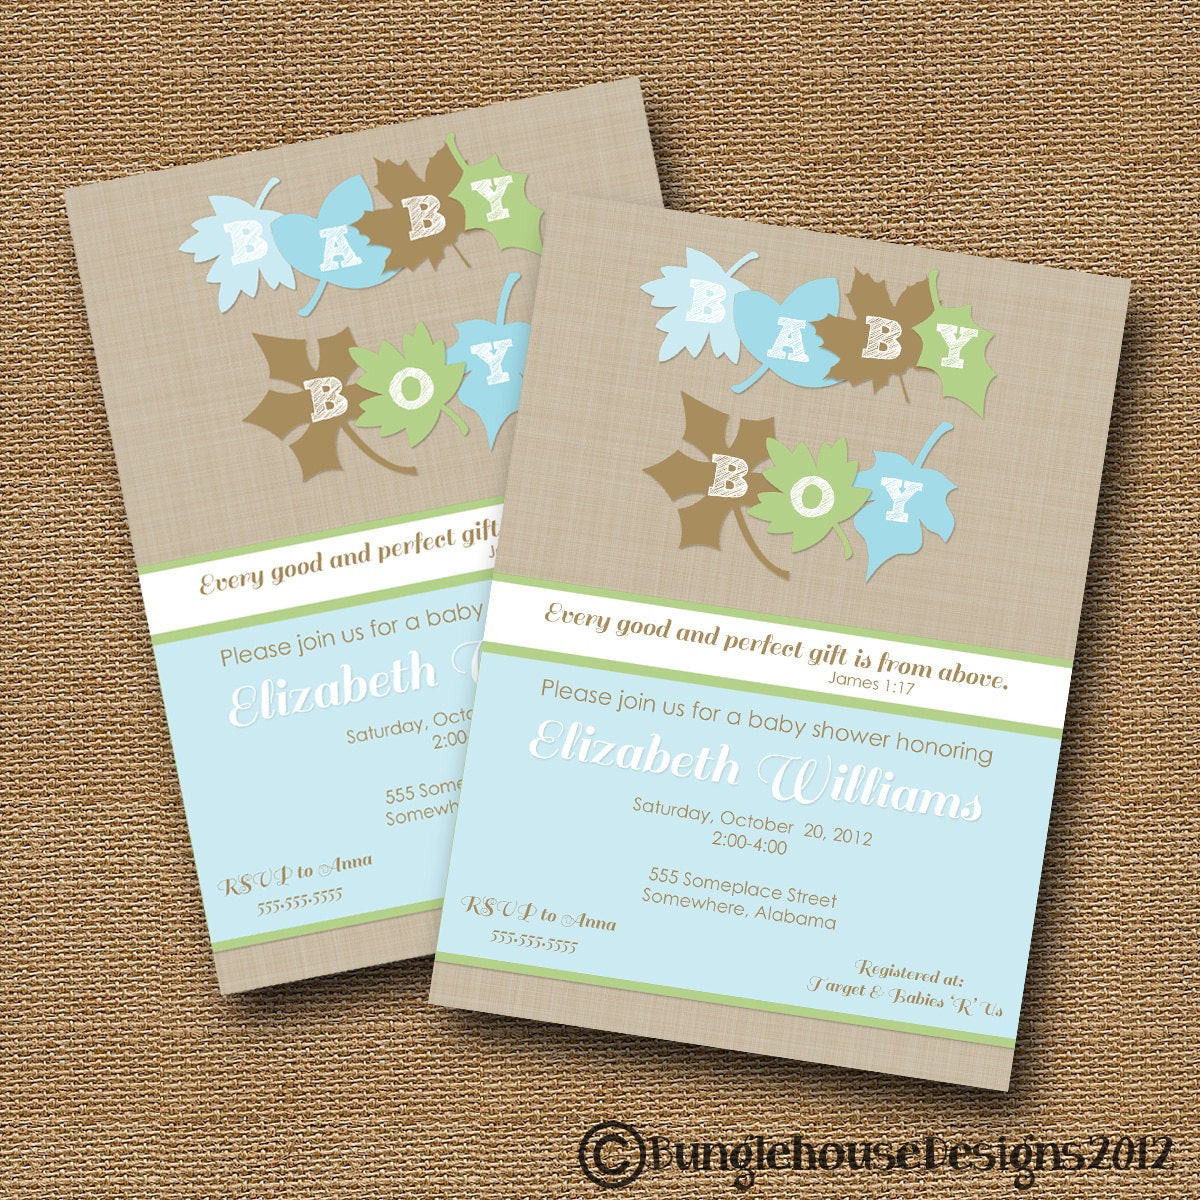 Baby Shower Invitations DIY
 Fall Leaves Baby Shower Invitation DIY by bunglehousedesigns